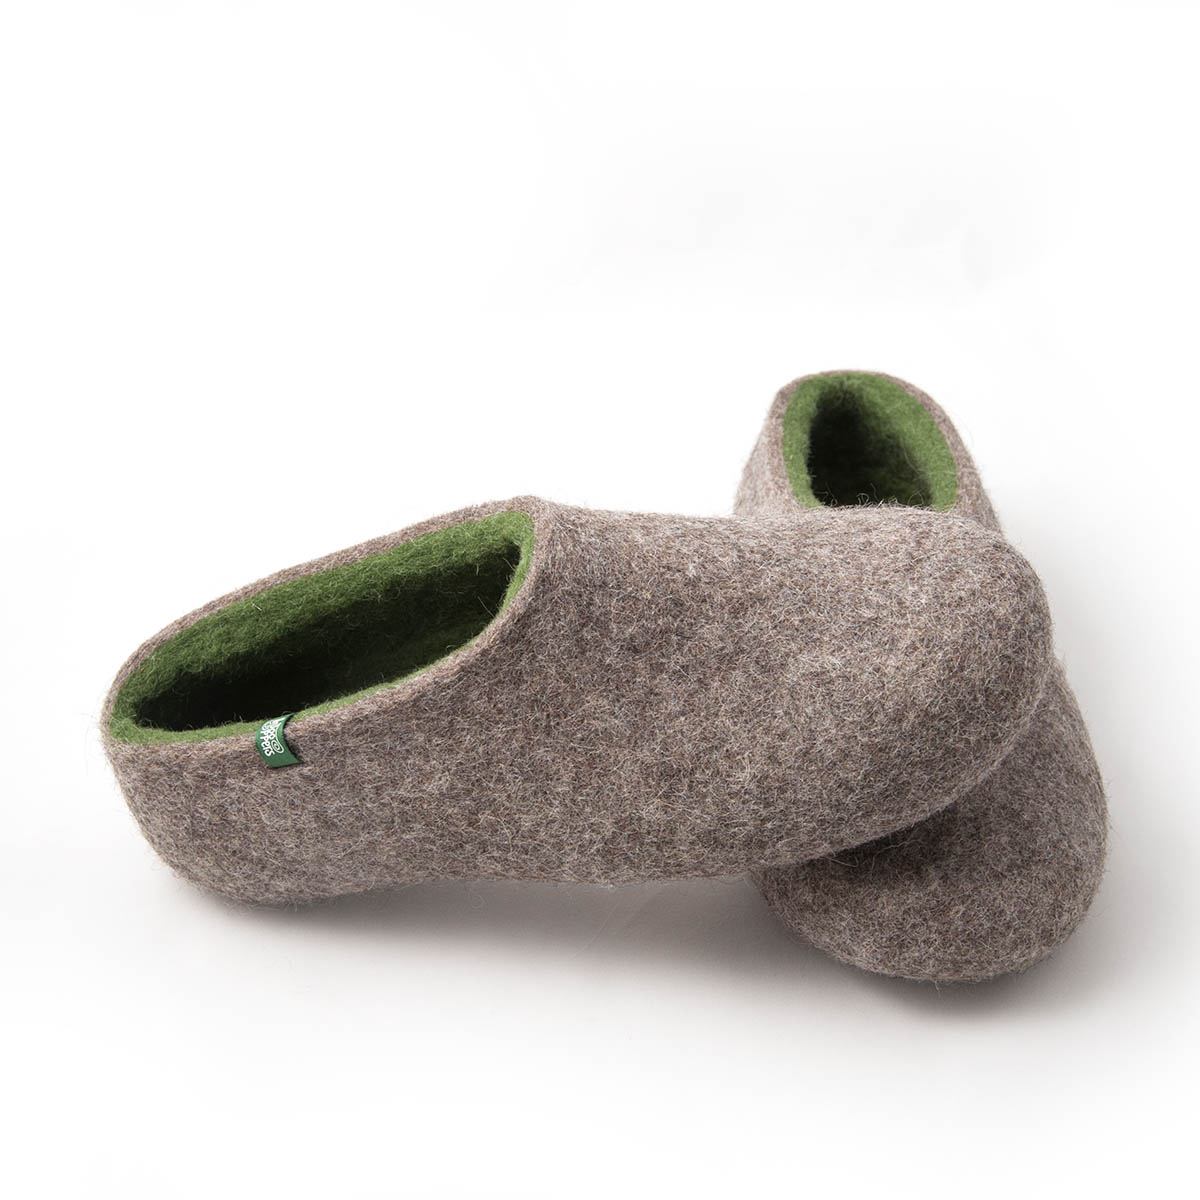 Men's Slippers and Clogs